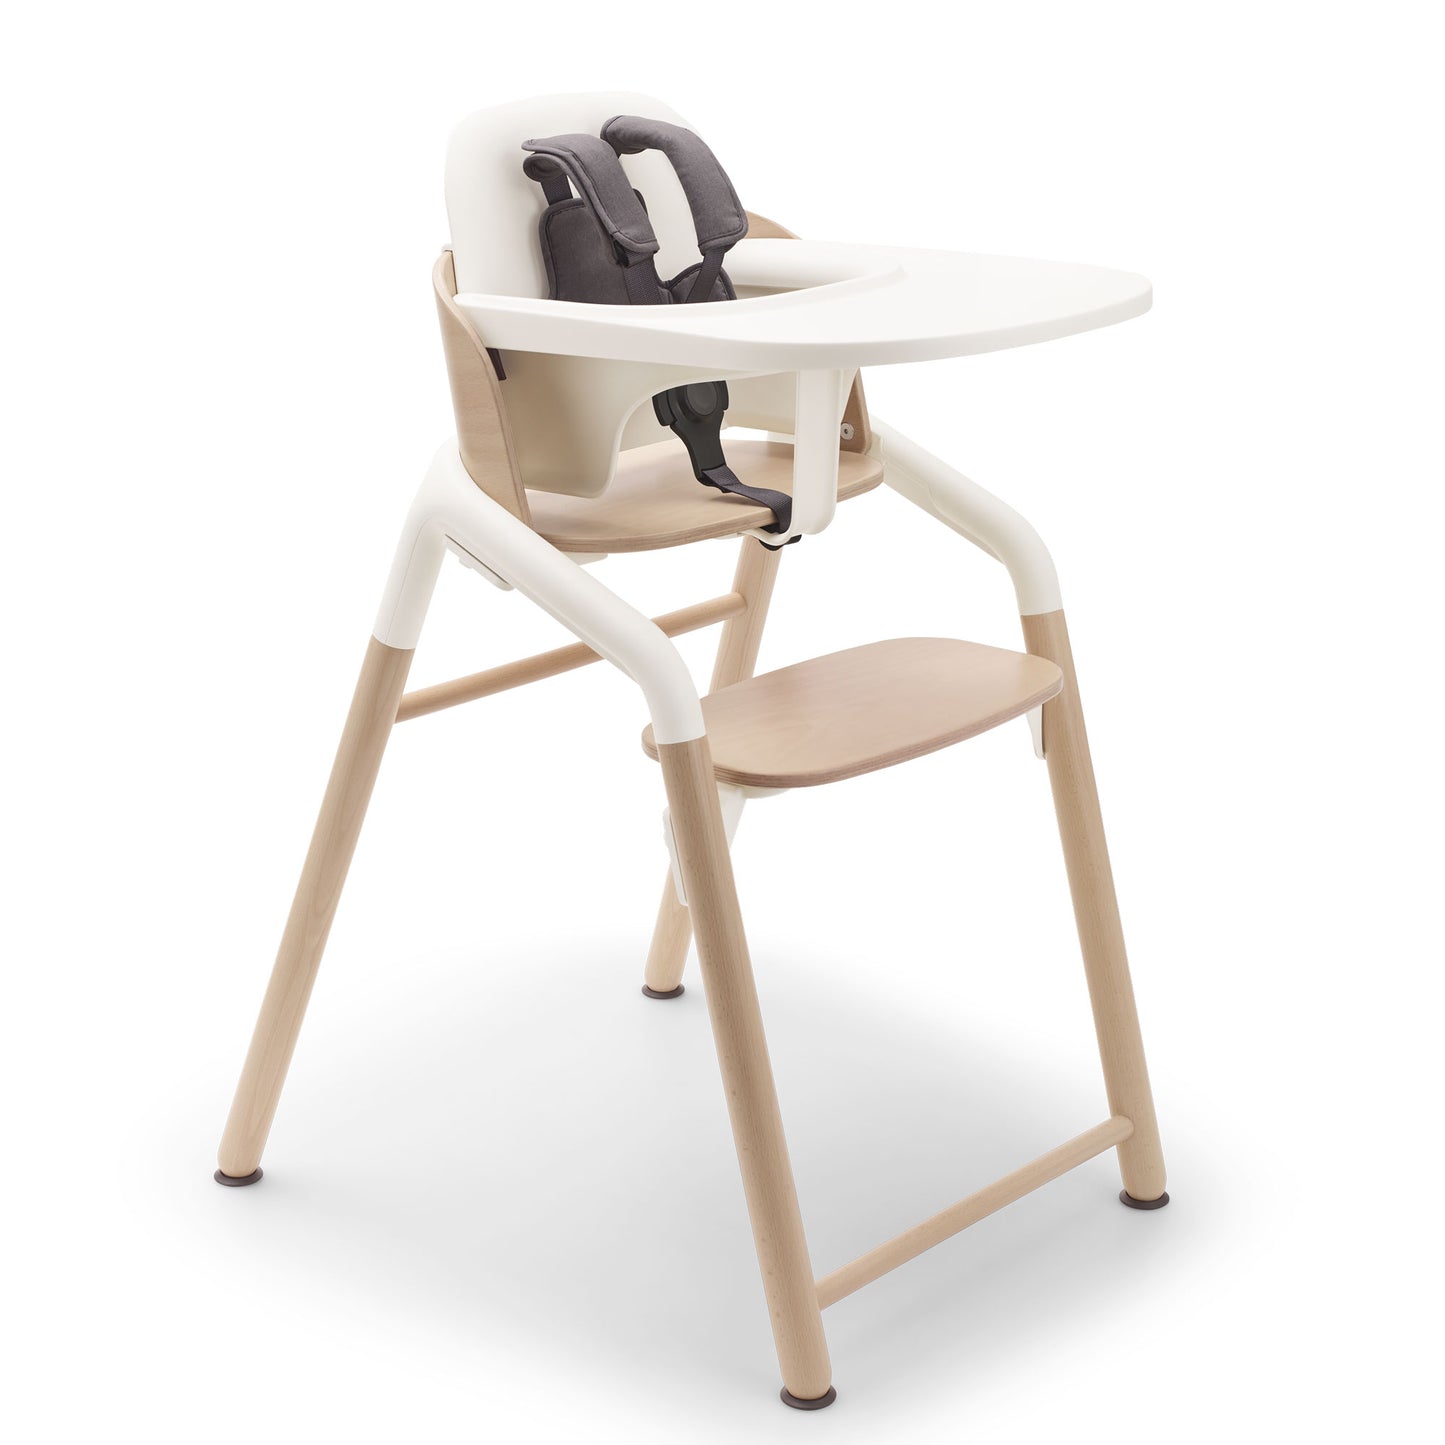 Bugaboo Giraffe High Chair Complete - Neutral Wood / White with tray